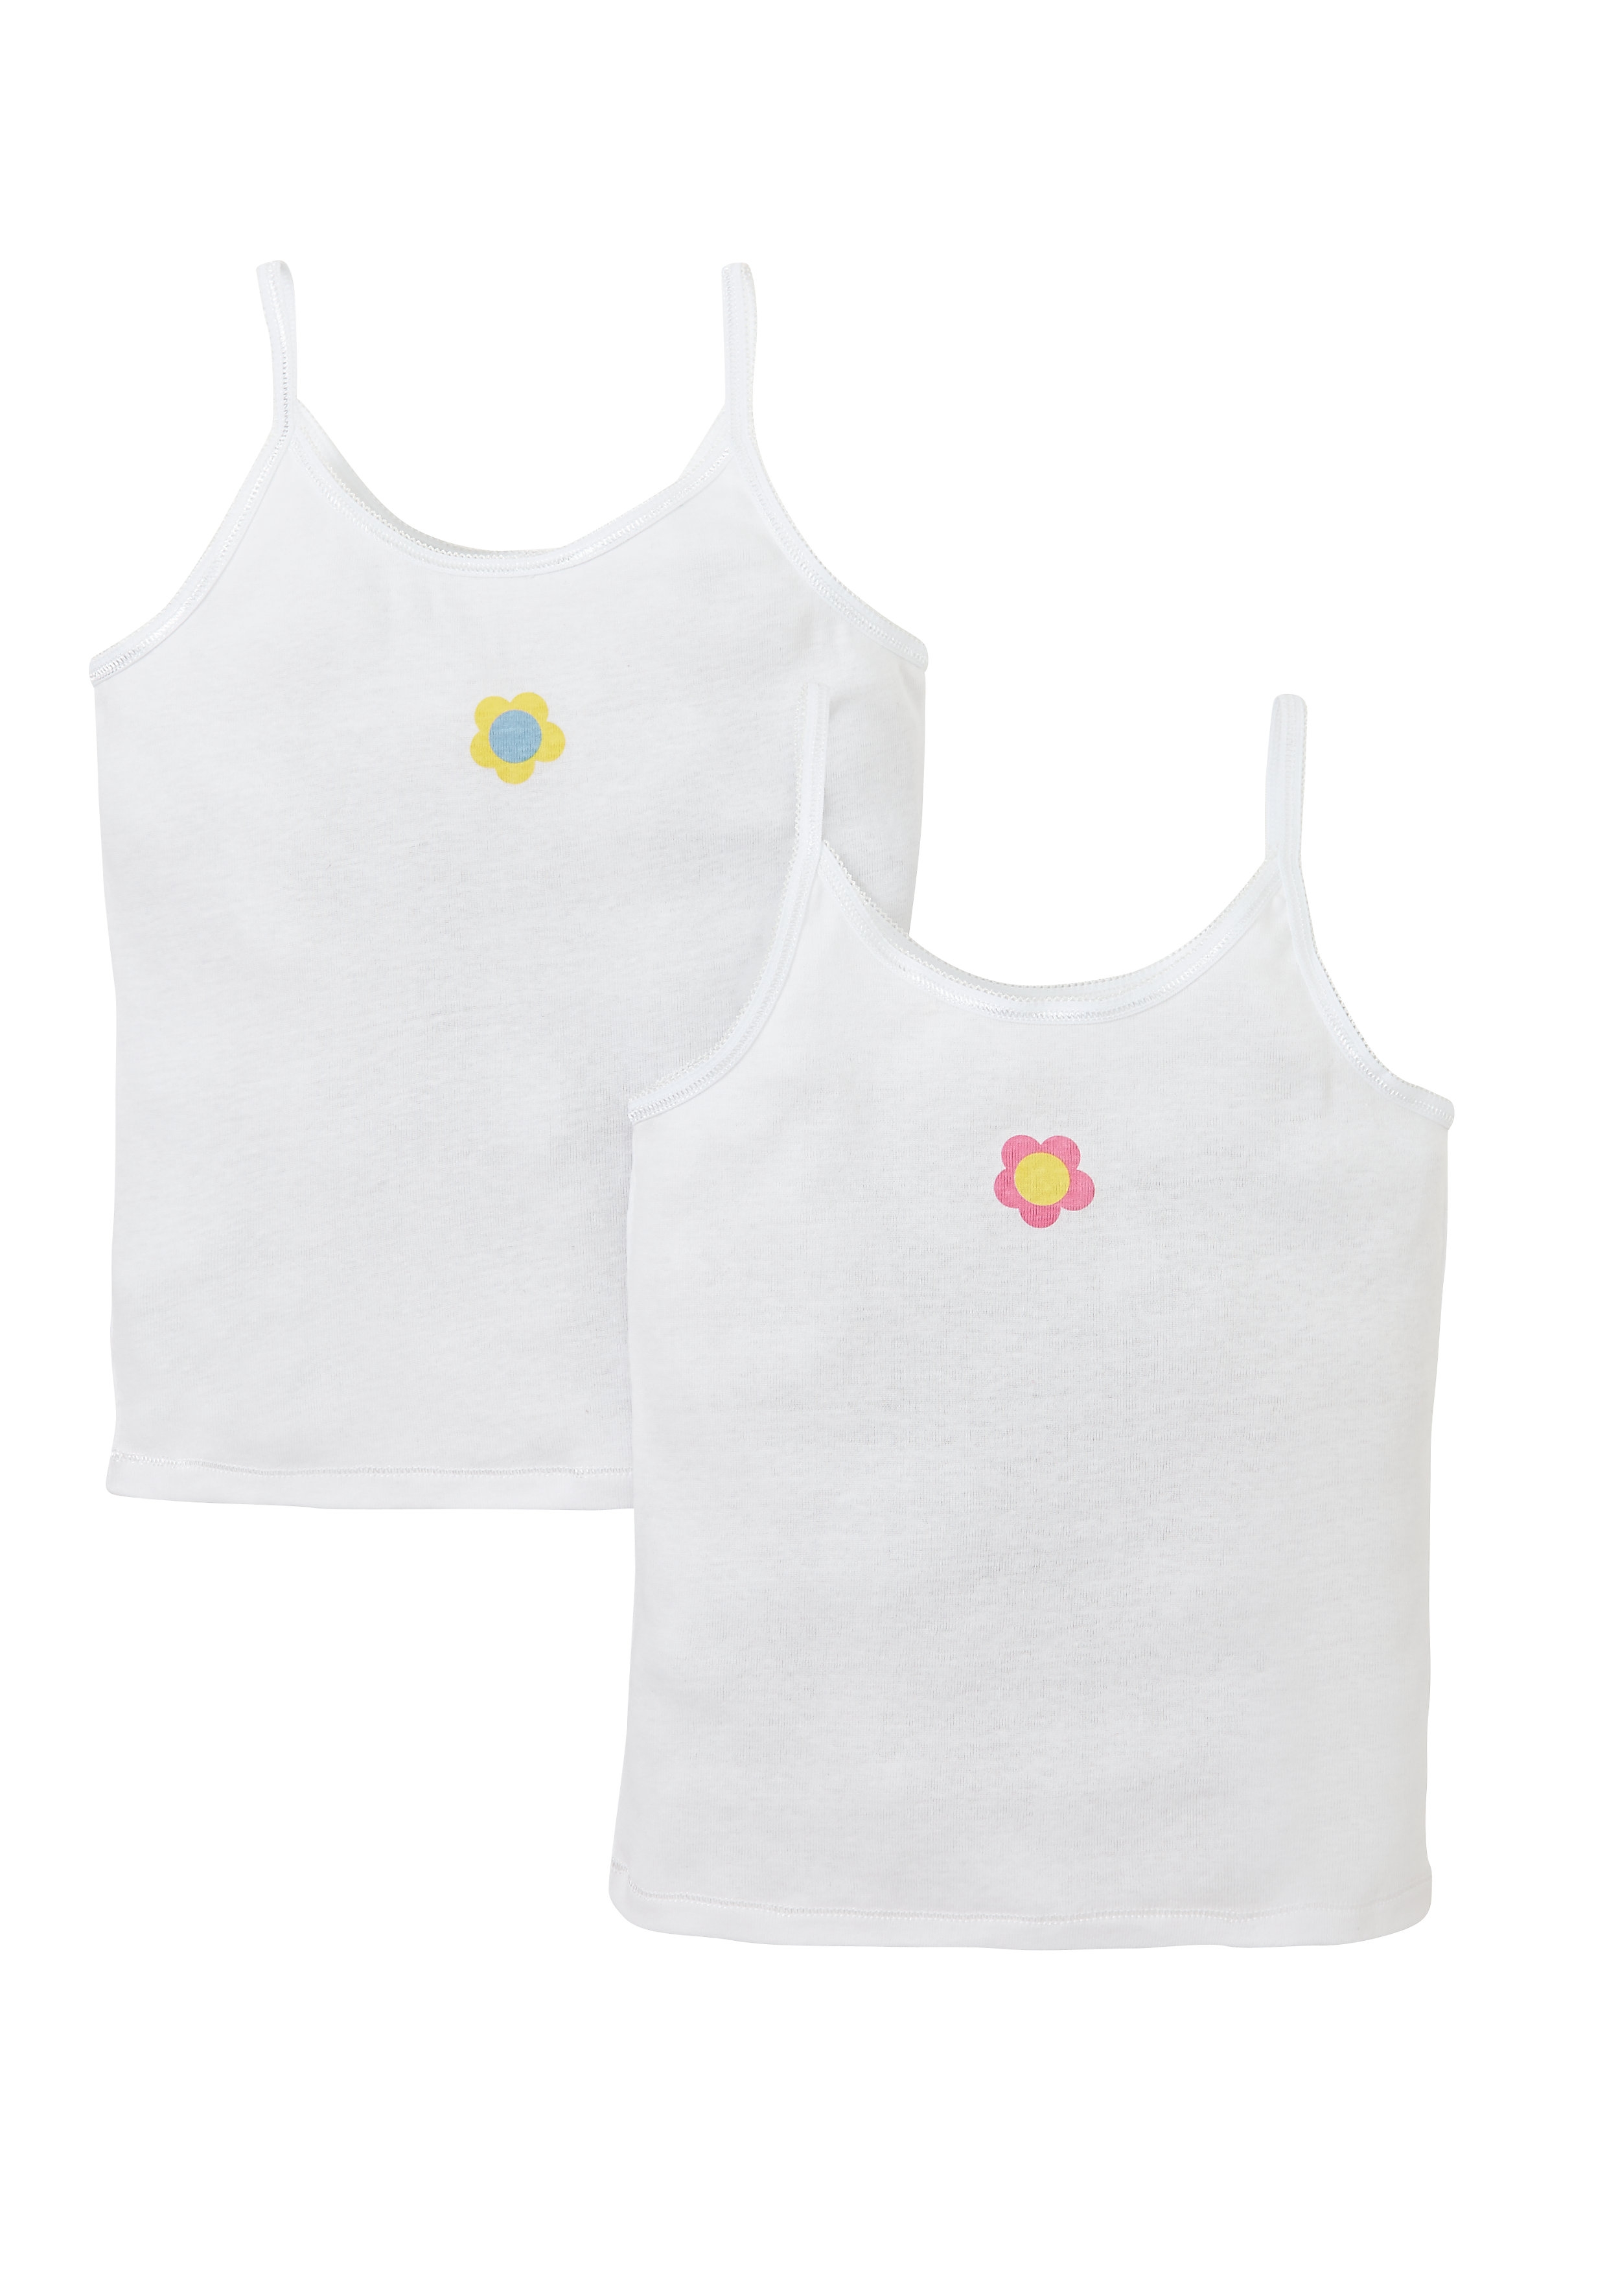 Mothercare | Girls Flower Cami Vests - Pack Of 2 - White